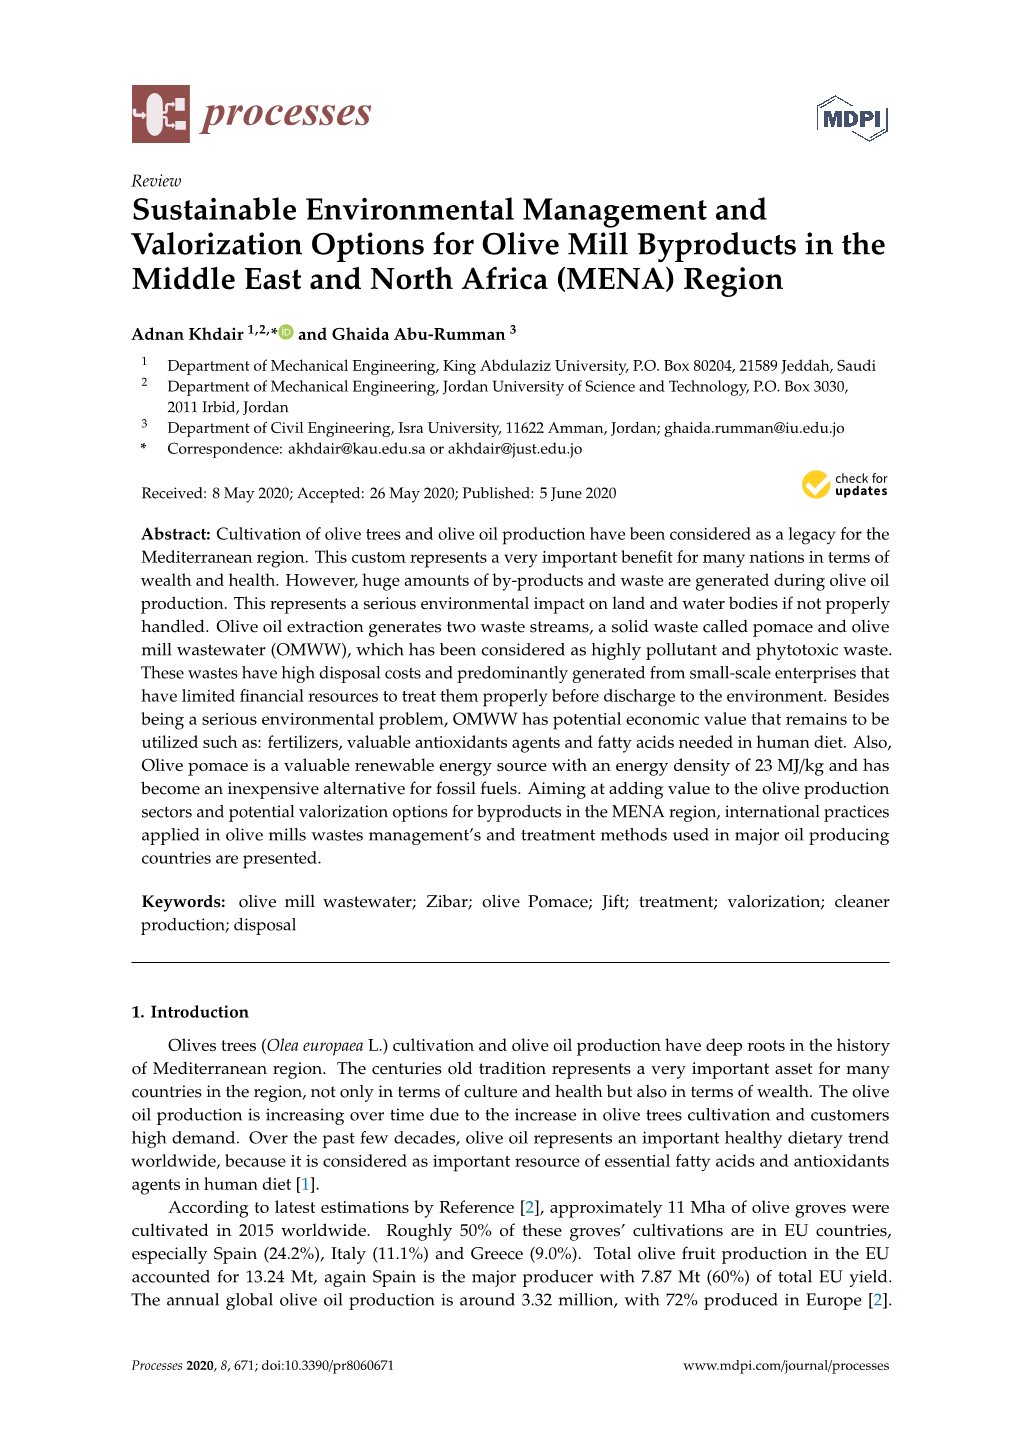 Sustainable Environmental Management and Valorization Options for Olive Mill Byproducts in the Middle East and North Africa (MENA) Region